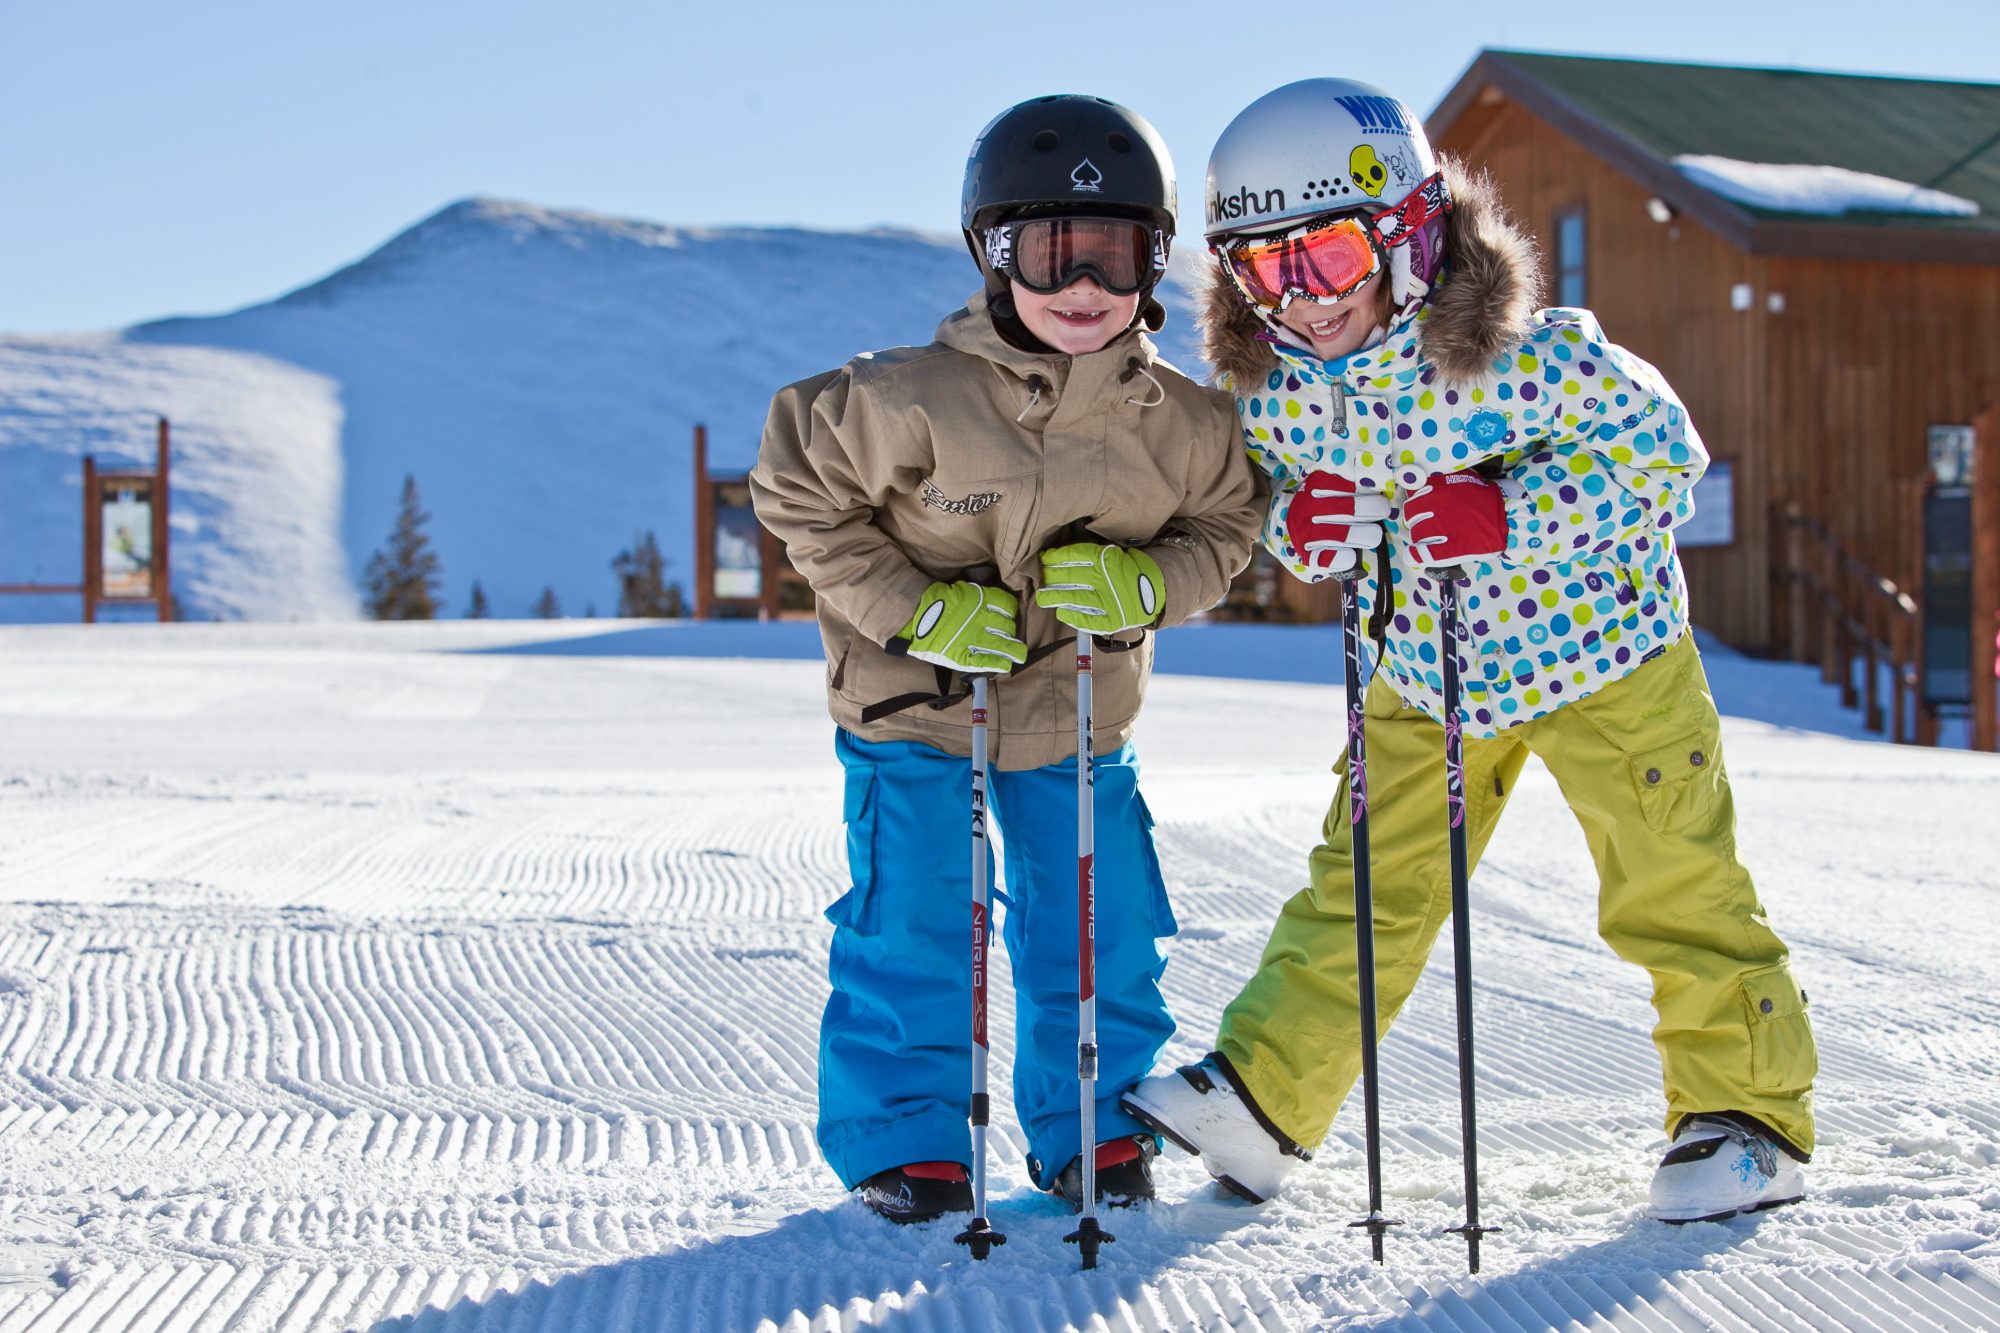 Kids having fun in Keystone, CO. Photo by Julia Vandenoever. Vail Resorts. So, you want to take your family skiing, but you do not know where to start?